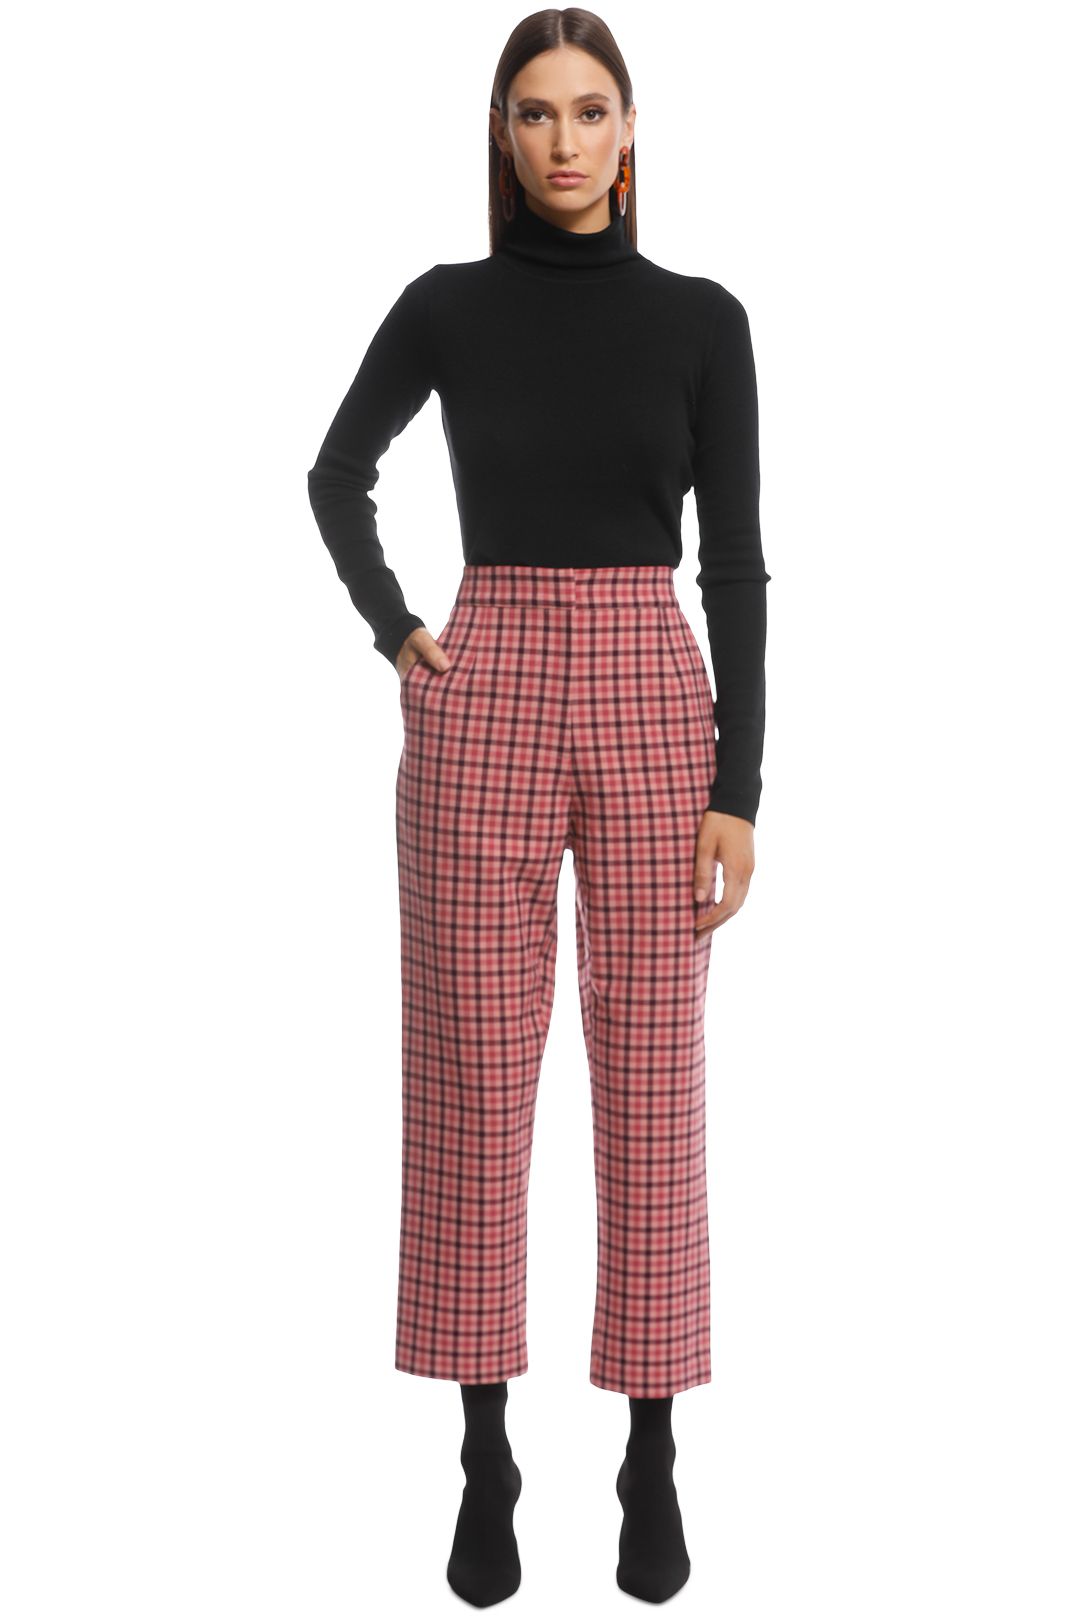 Pasduchas - Ravel Trousers - Pink - Front